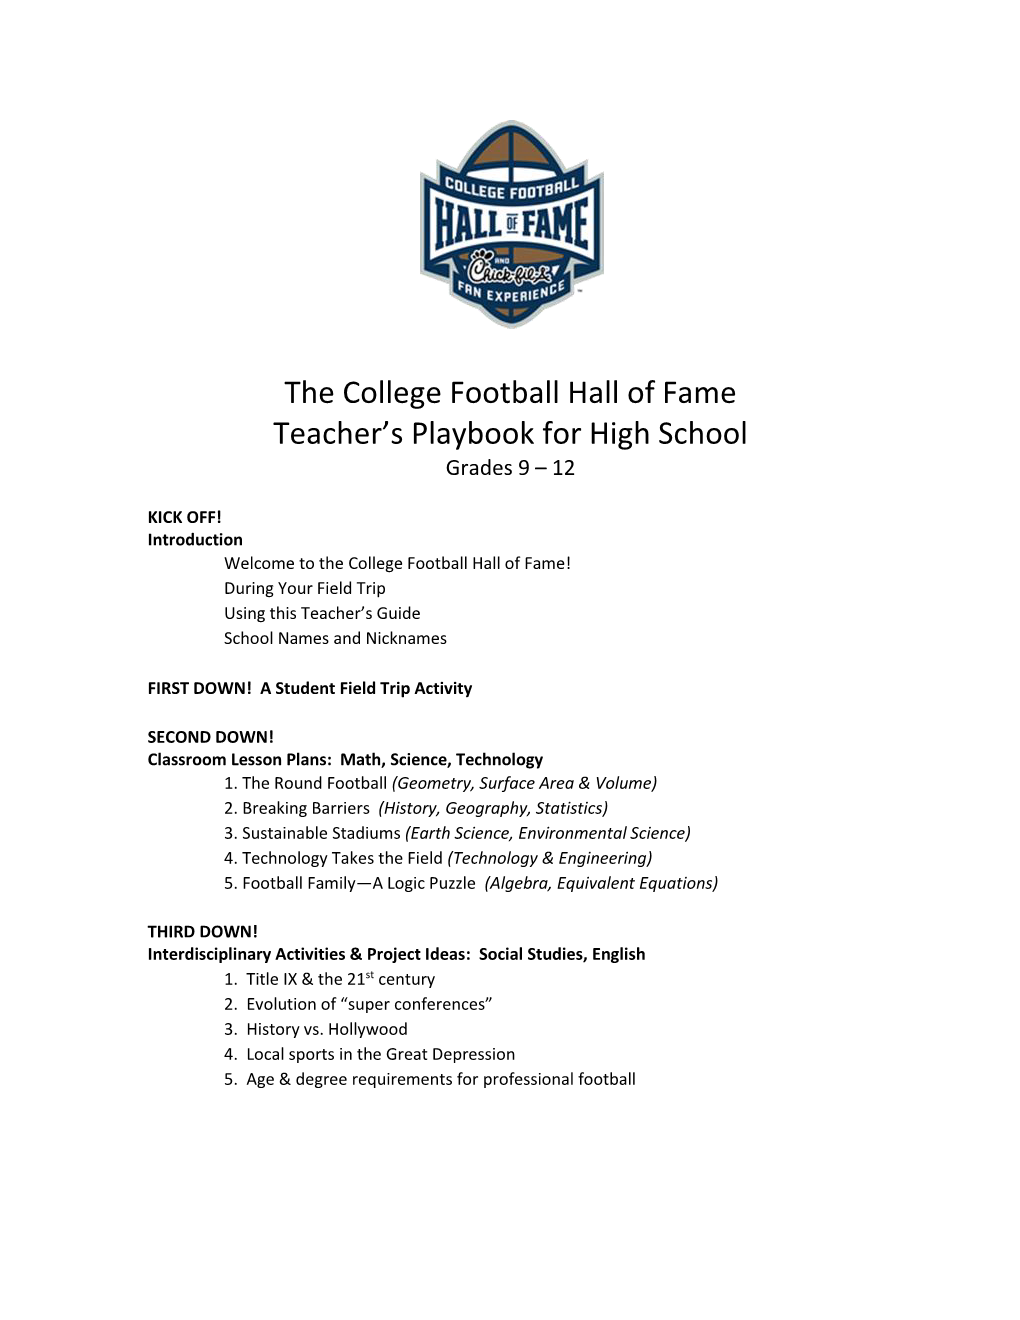 The College Football Hall of Fame Teacher's Playbook for High School